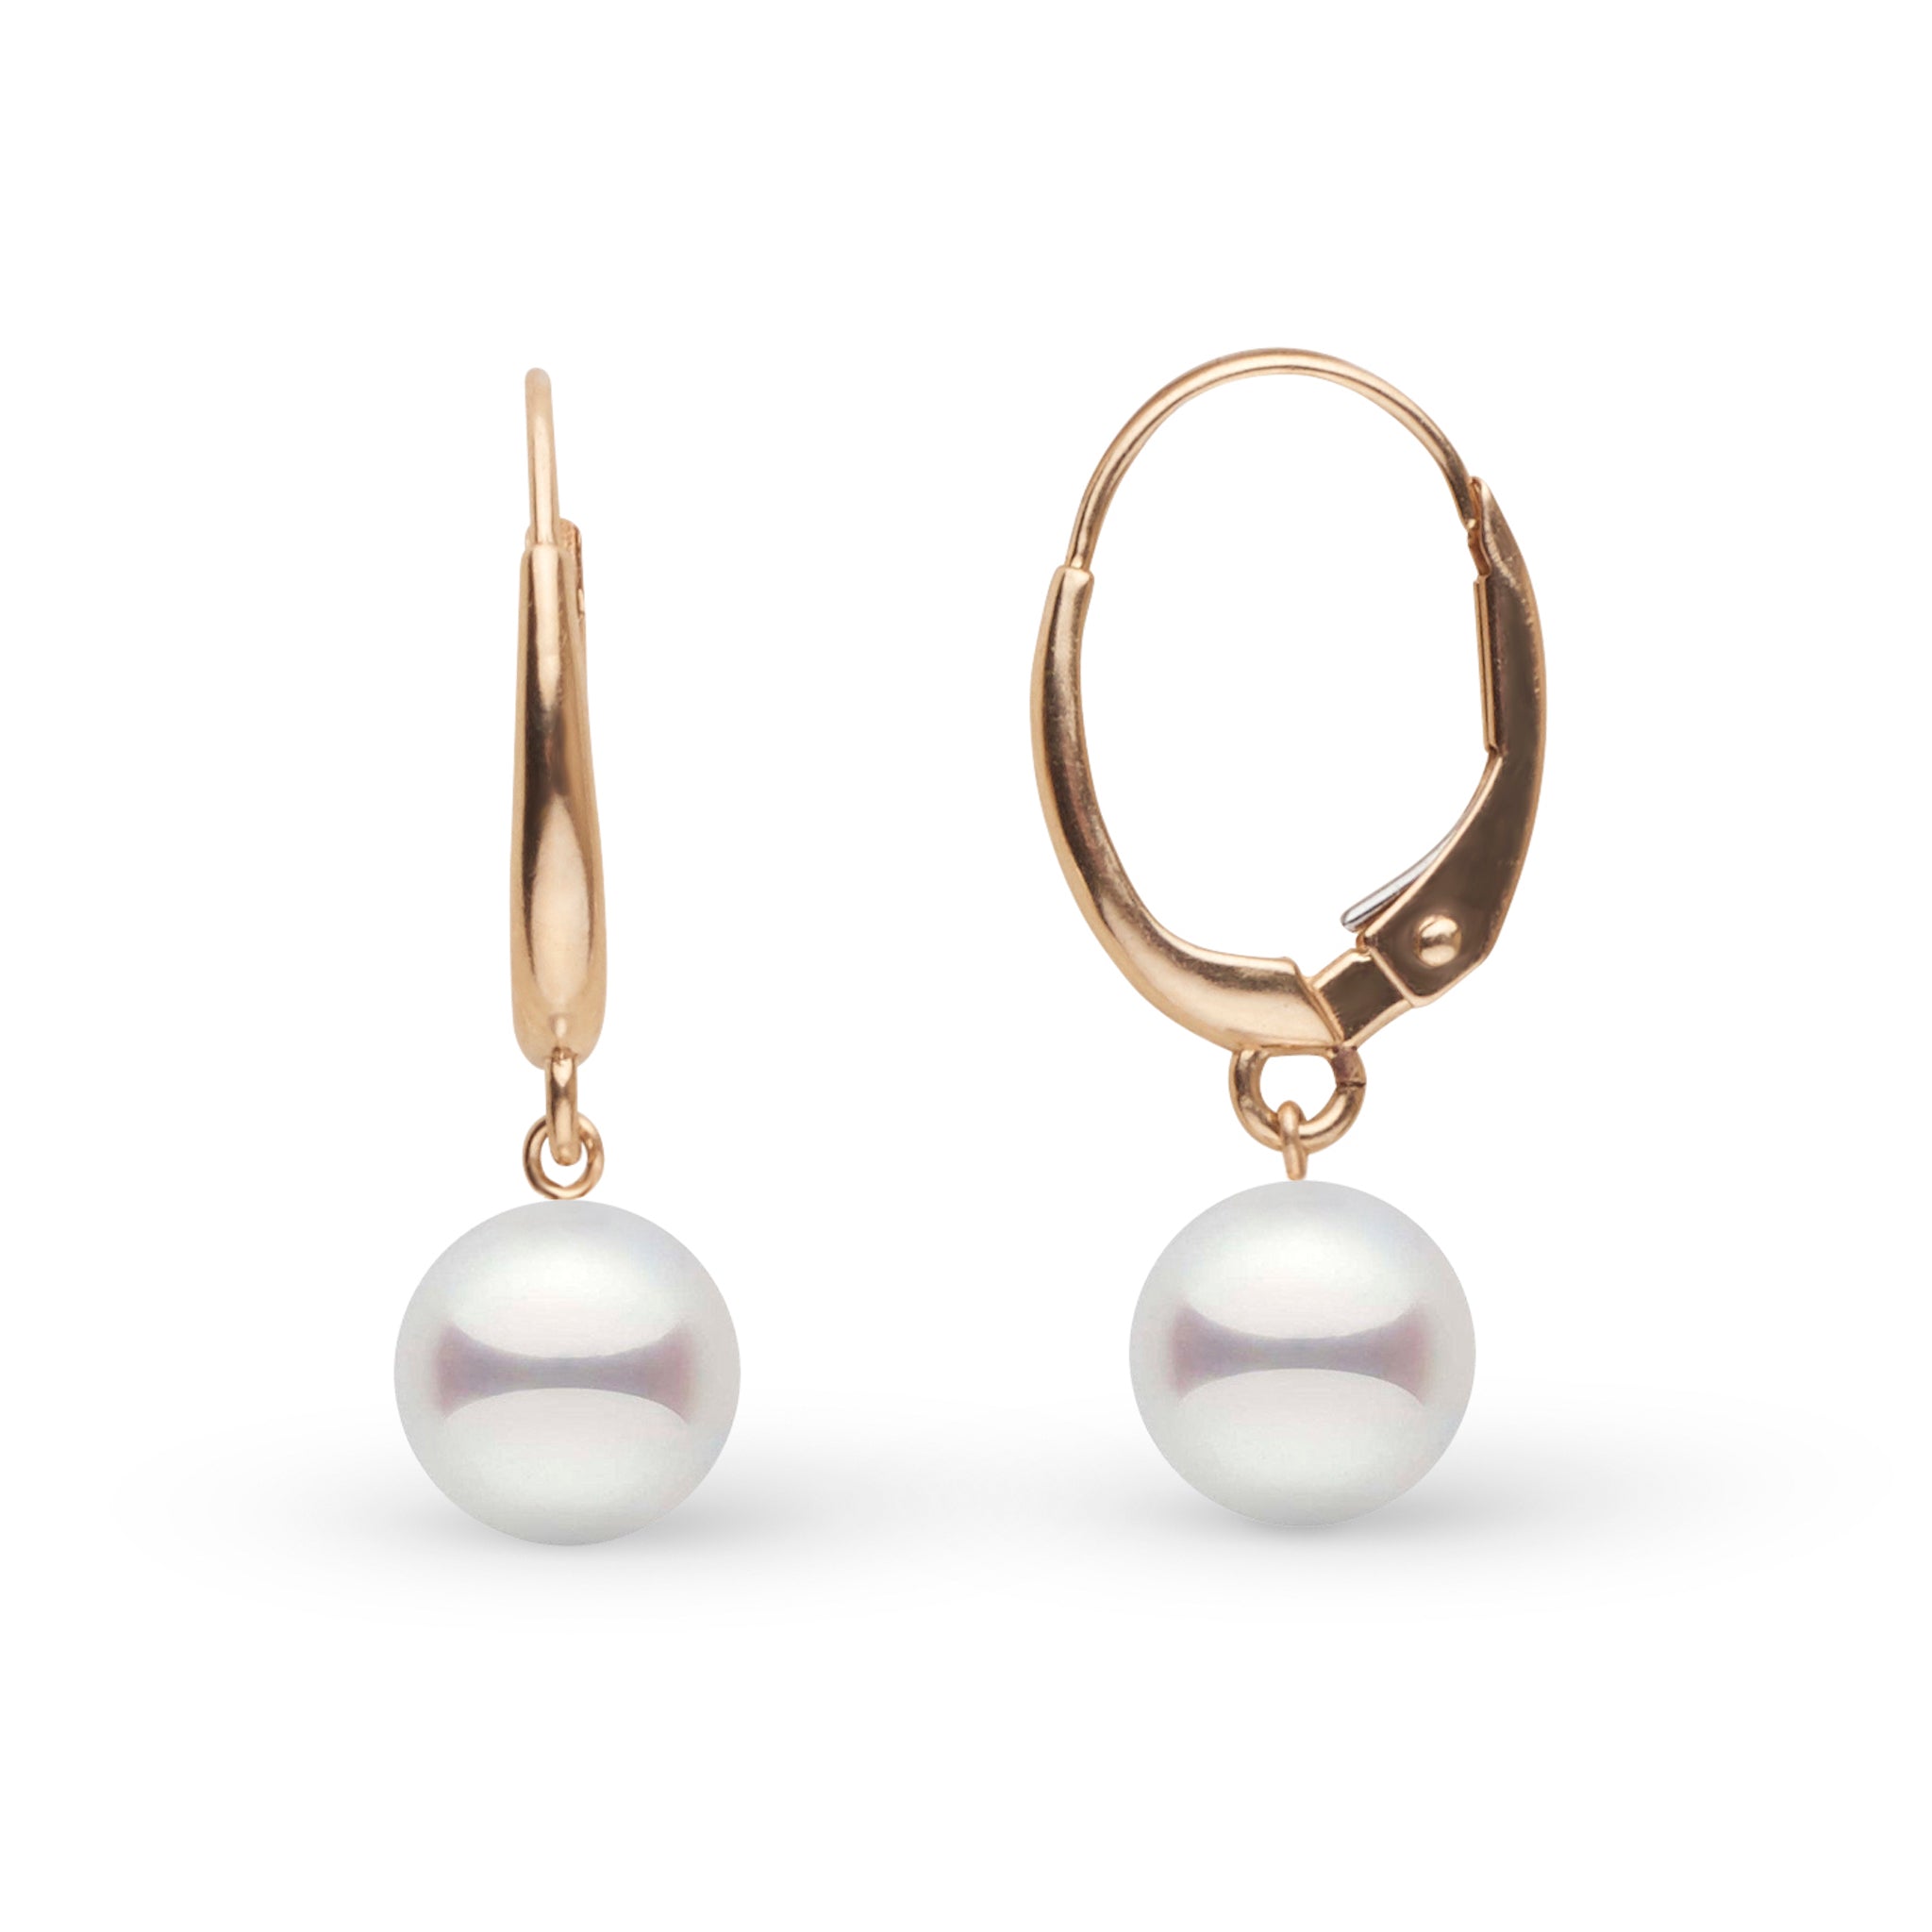 8.5-9.0 mm Akoya Pearl Muse Collection Earrings yellow gold